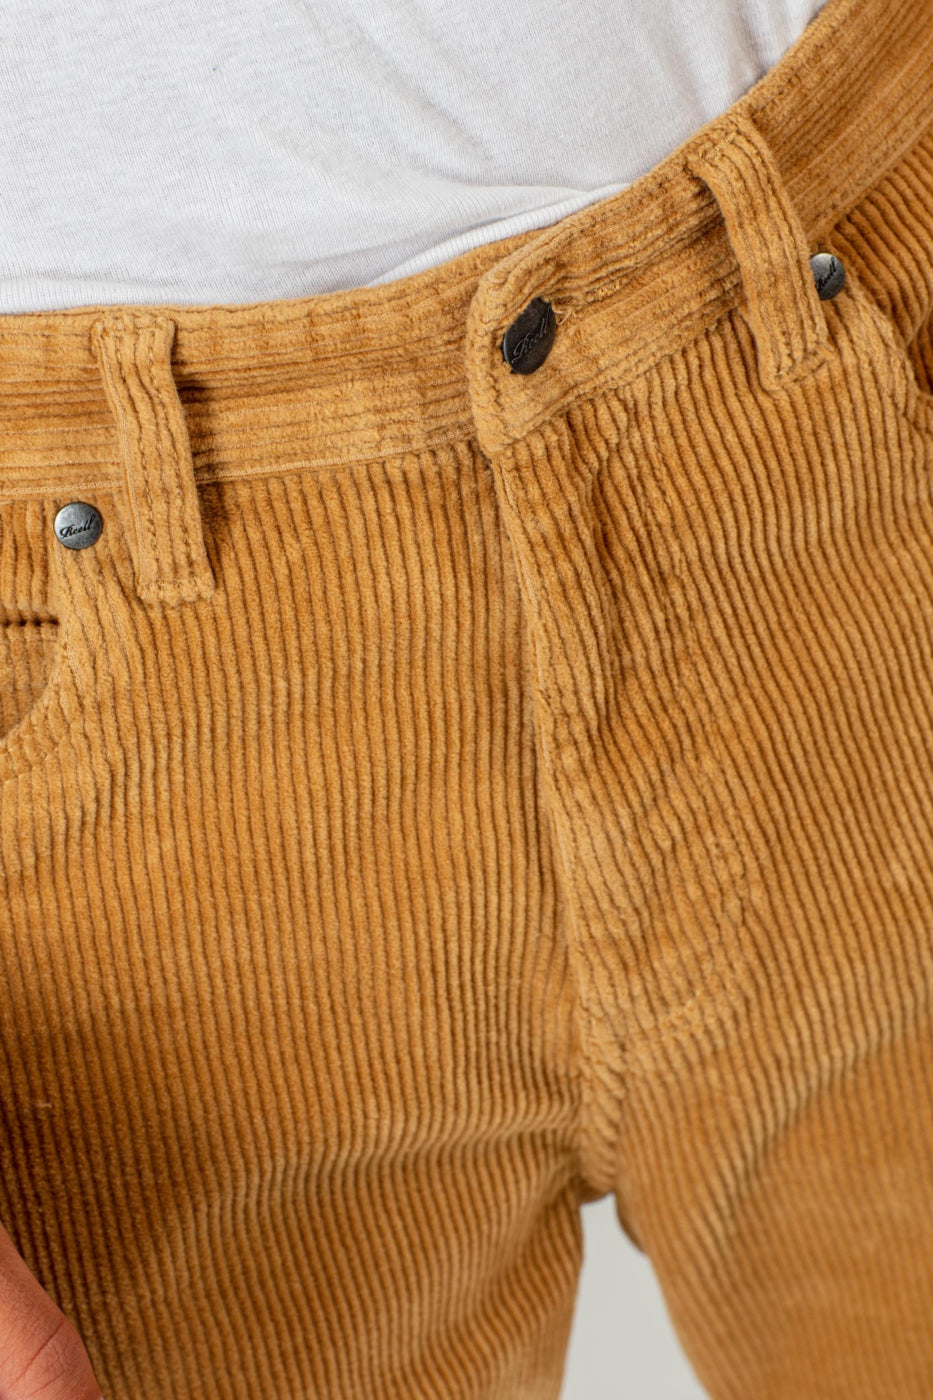 Reell Rave Jeans - Golden Sand Cord